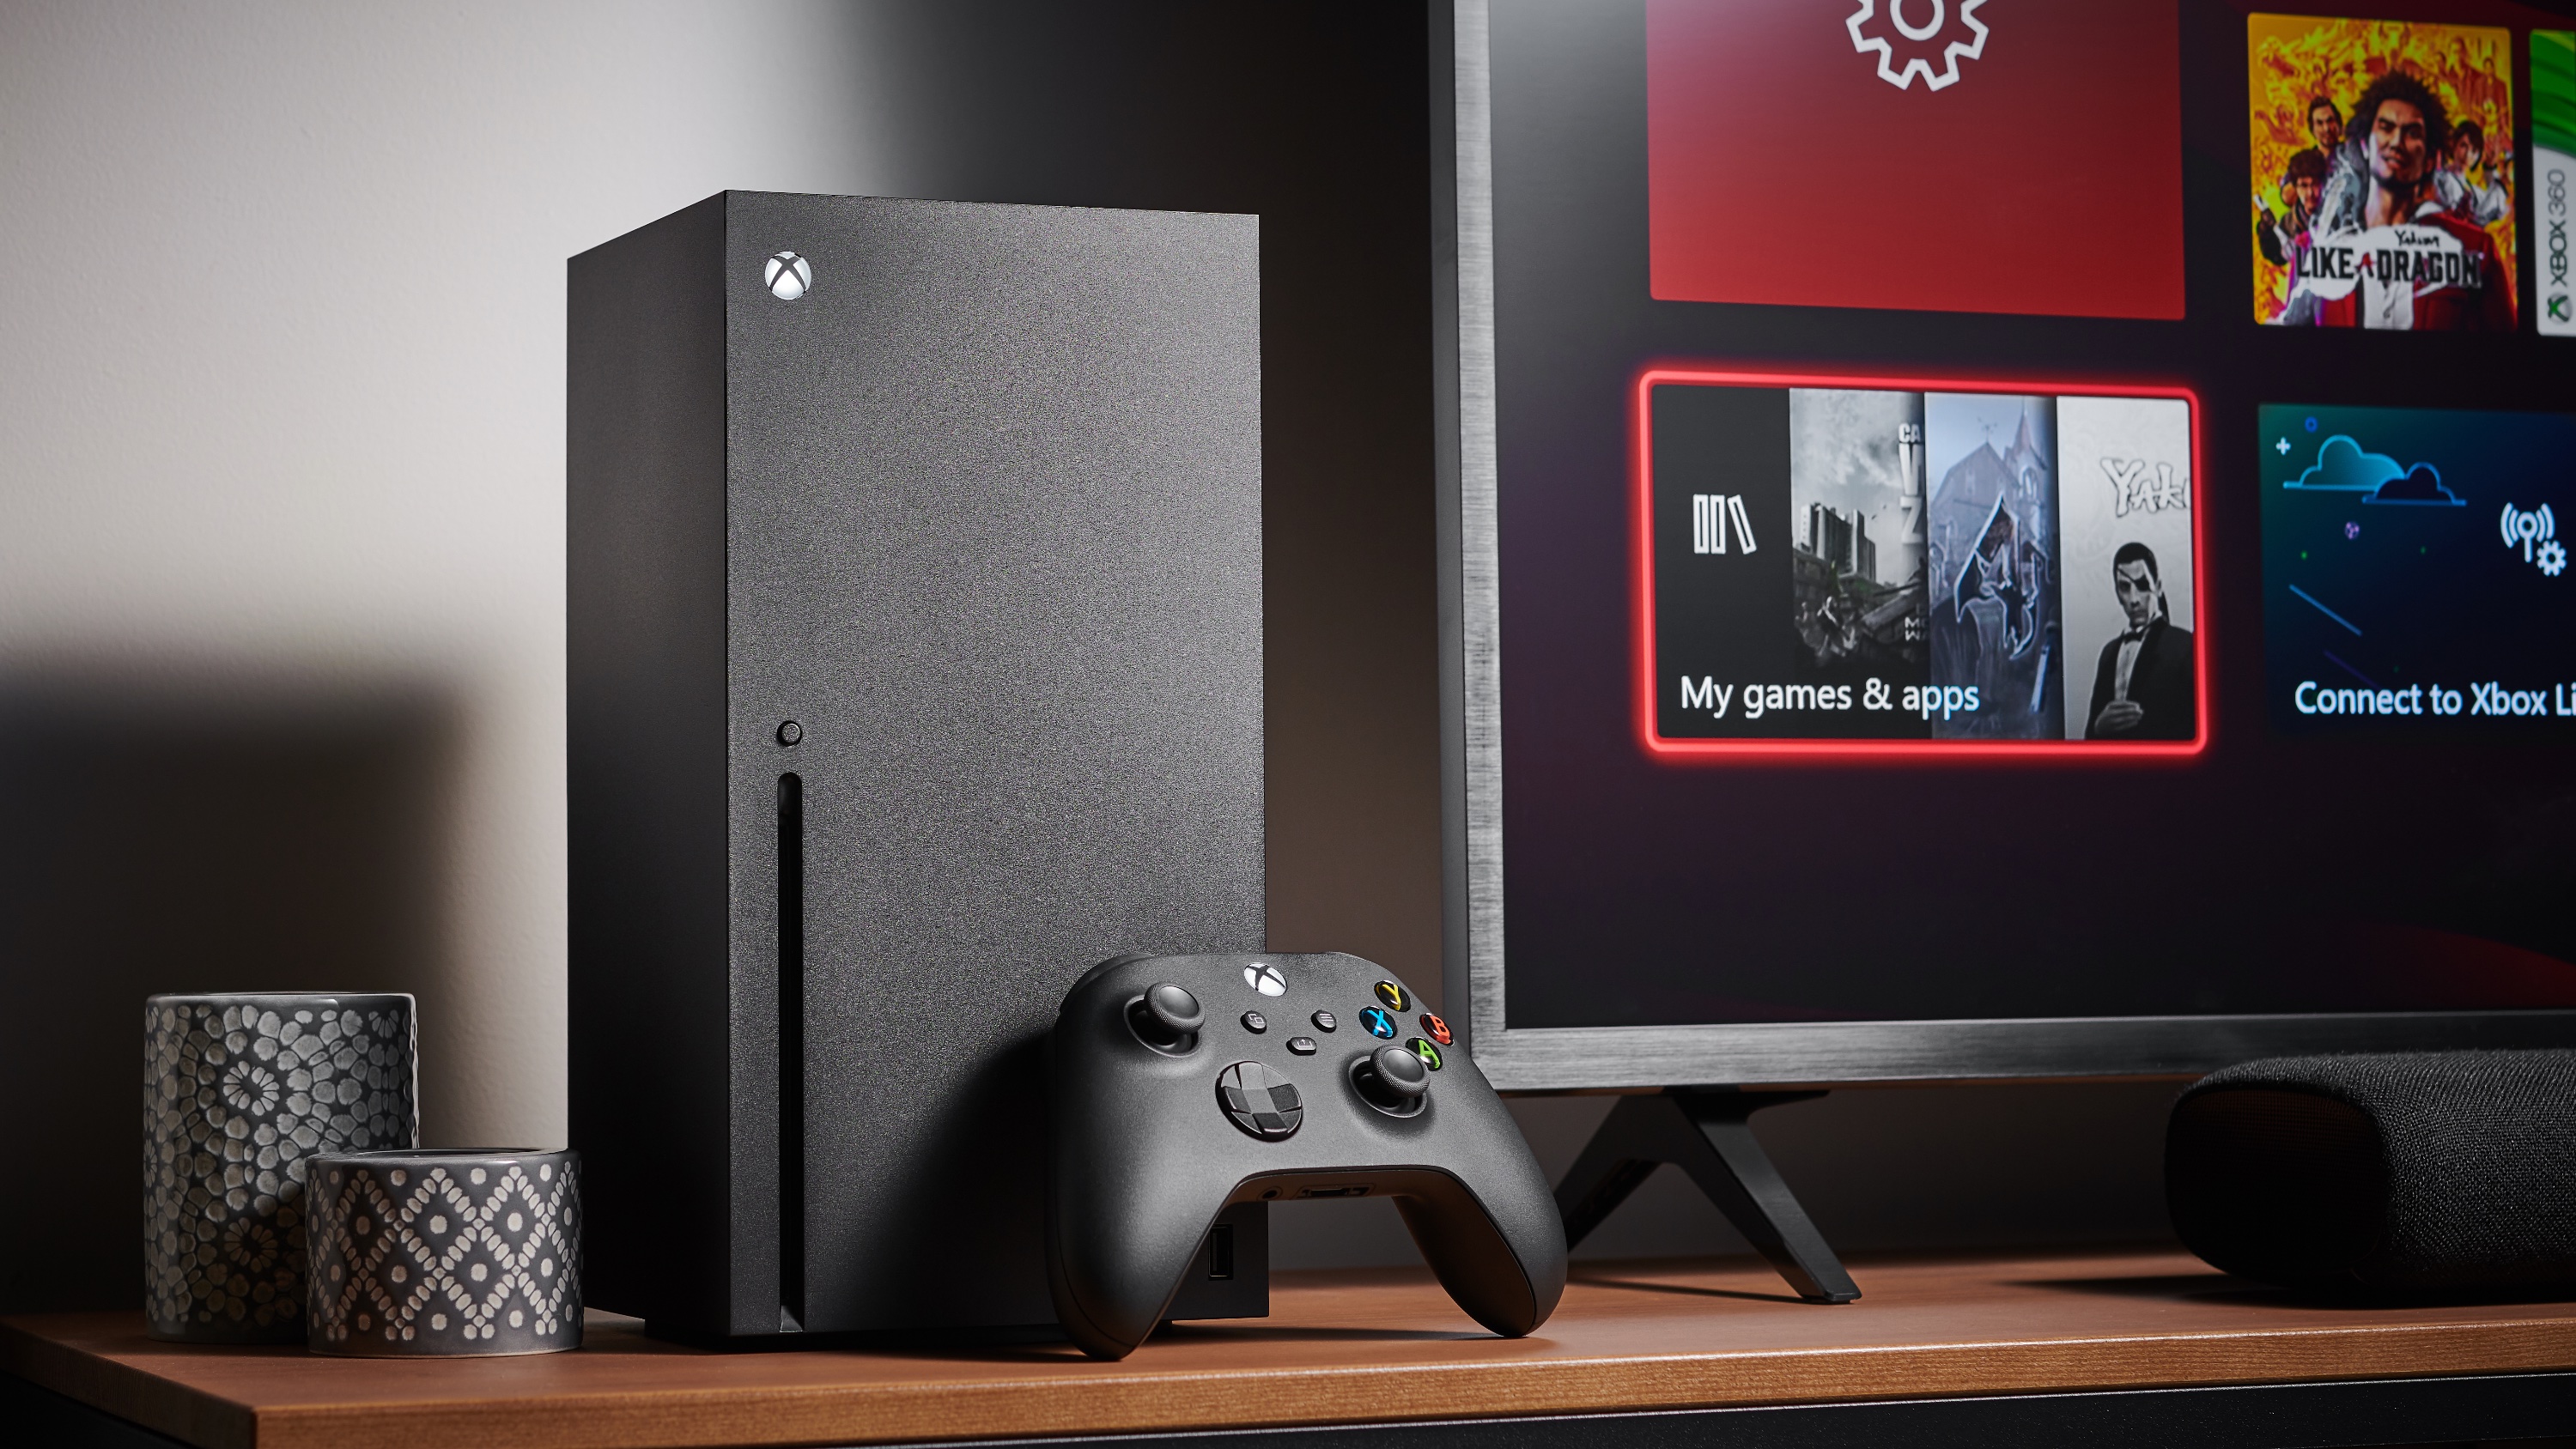 The Xbox Series X offers killer gaming—if your TV can handle it